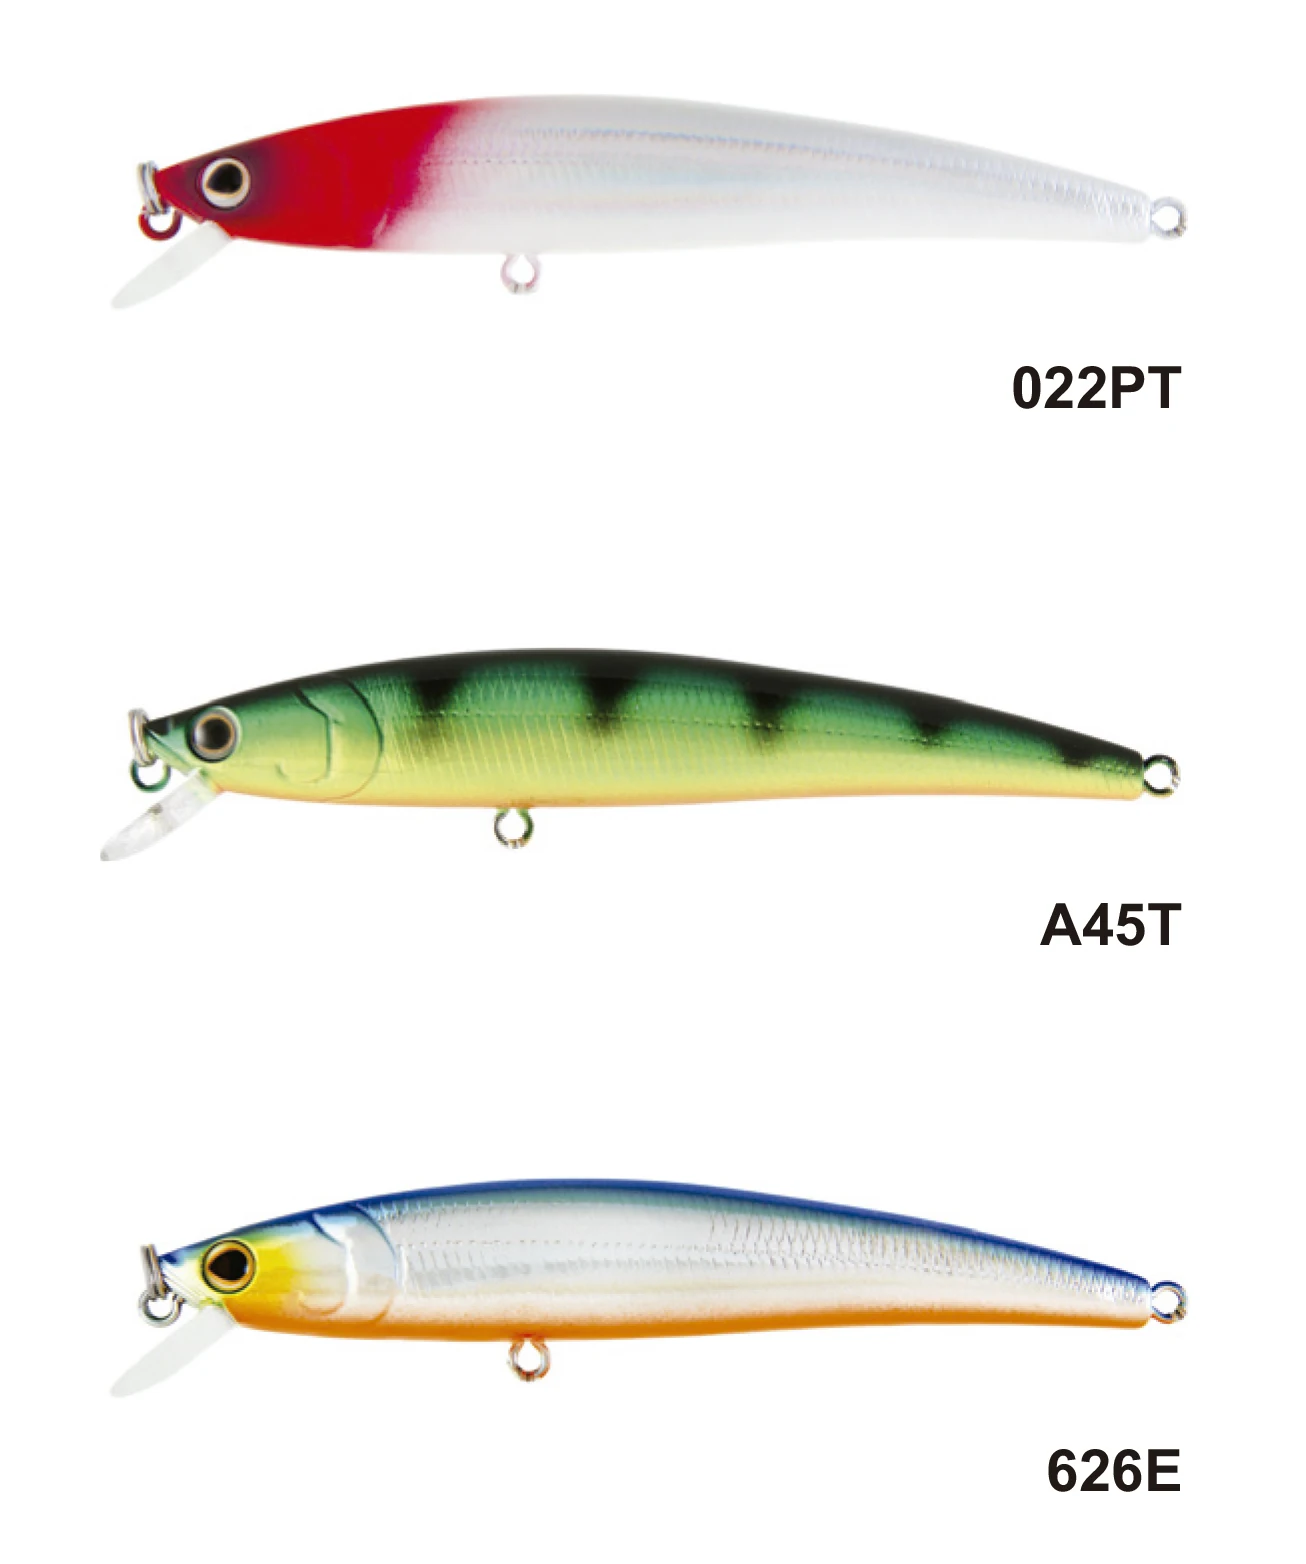 https://ae01.alicdn.com/kf/U2cc26e0b3d3b40d495cda919906bc1c12/Strikepro-Arc-Minnow-floating-fishing-lures-3-colors-2-sizes-hard-lure-sea-fishing-and-Pike.jpg